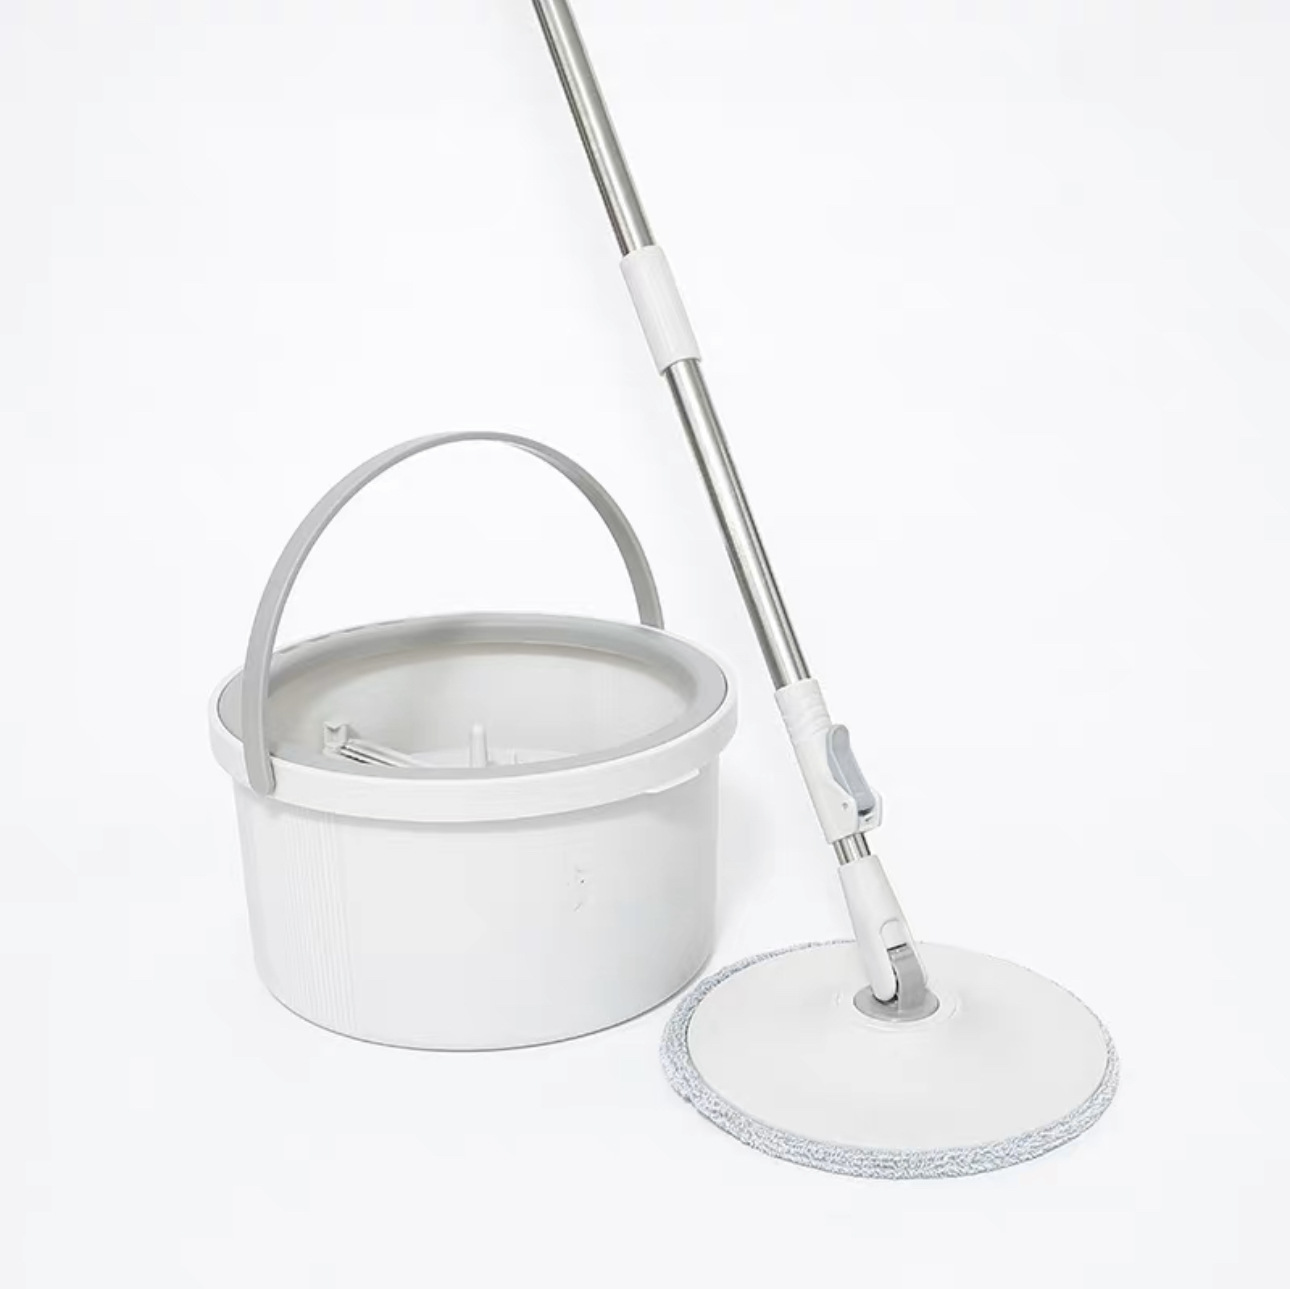 Hand Wash-Free Lazy Mop Clean Dirt Separation New Homehold Automatic Mop Flat Plate Mopping Gadget Pier Mop